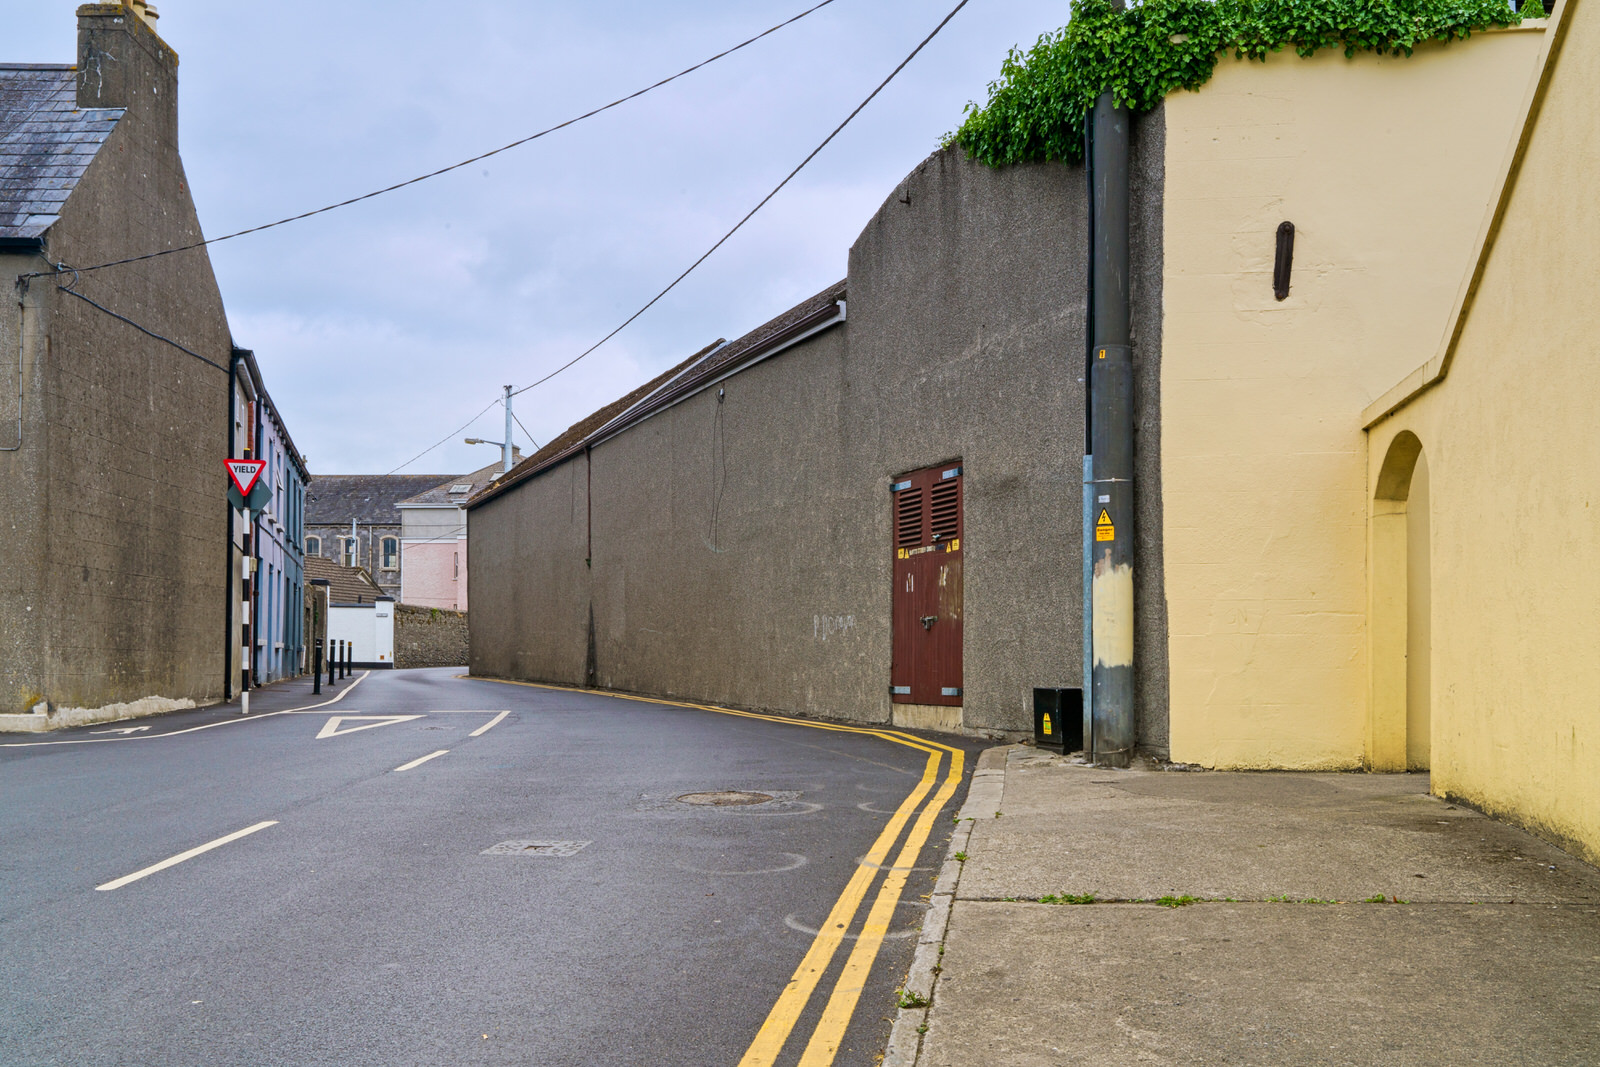 IN 2018 I EXPLORED A NARROW LANE NETWORK IN KILKENNY [DEAN STREET TO BUTT'S GREEN]-234291-1